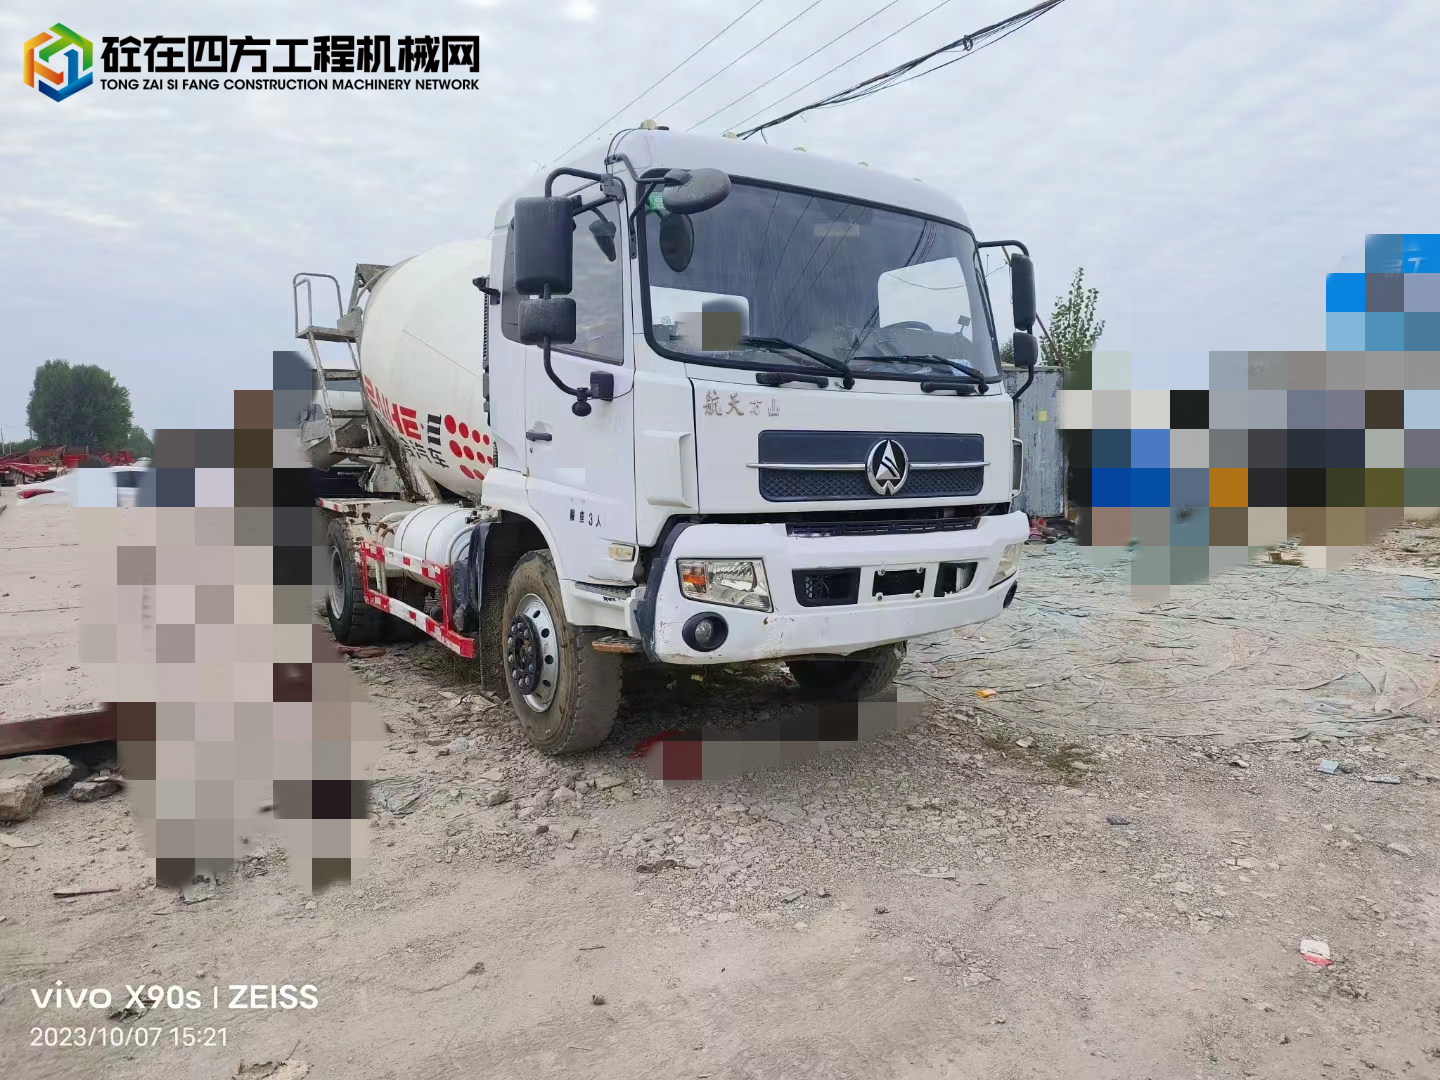 https://images.tongzsf.com/tong/truck_machine/20231016/1652caf5f18890.jpg